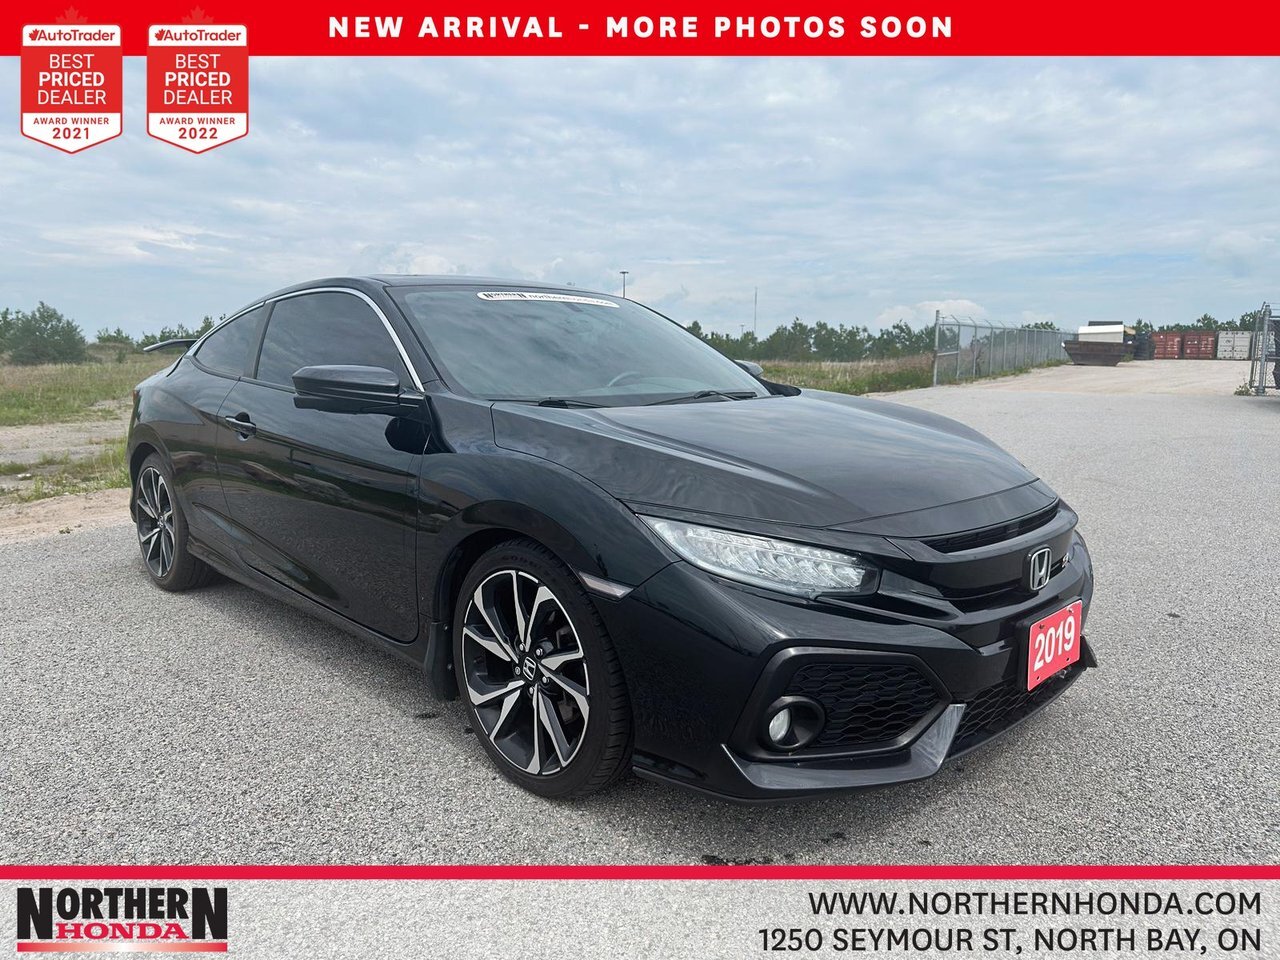 2019 Honda Civic Si One Owner|Rubber Mats